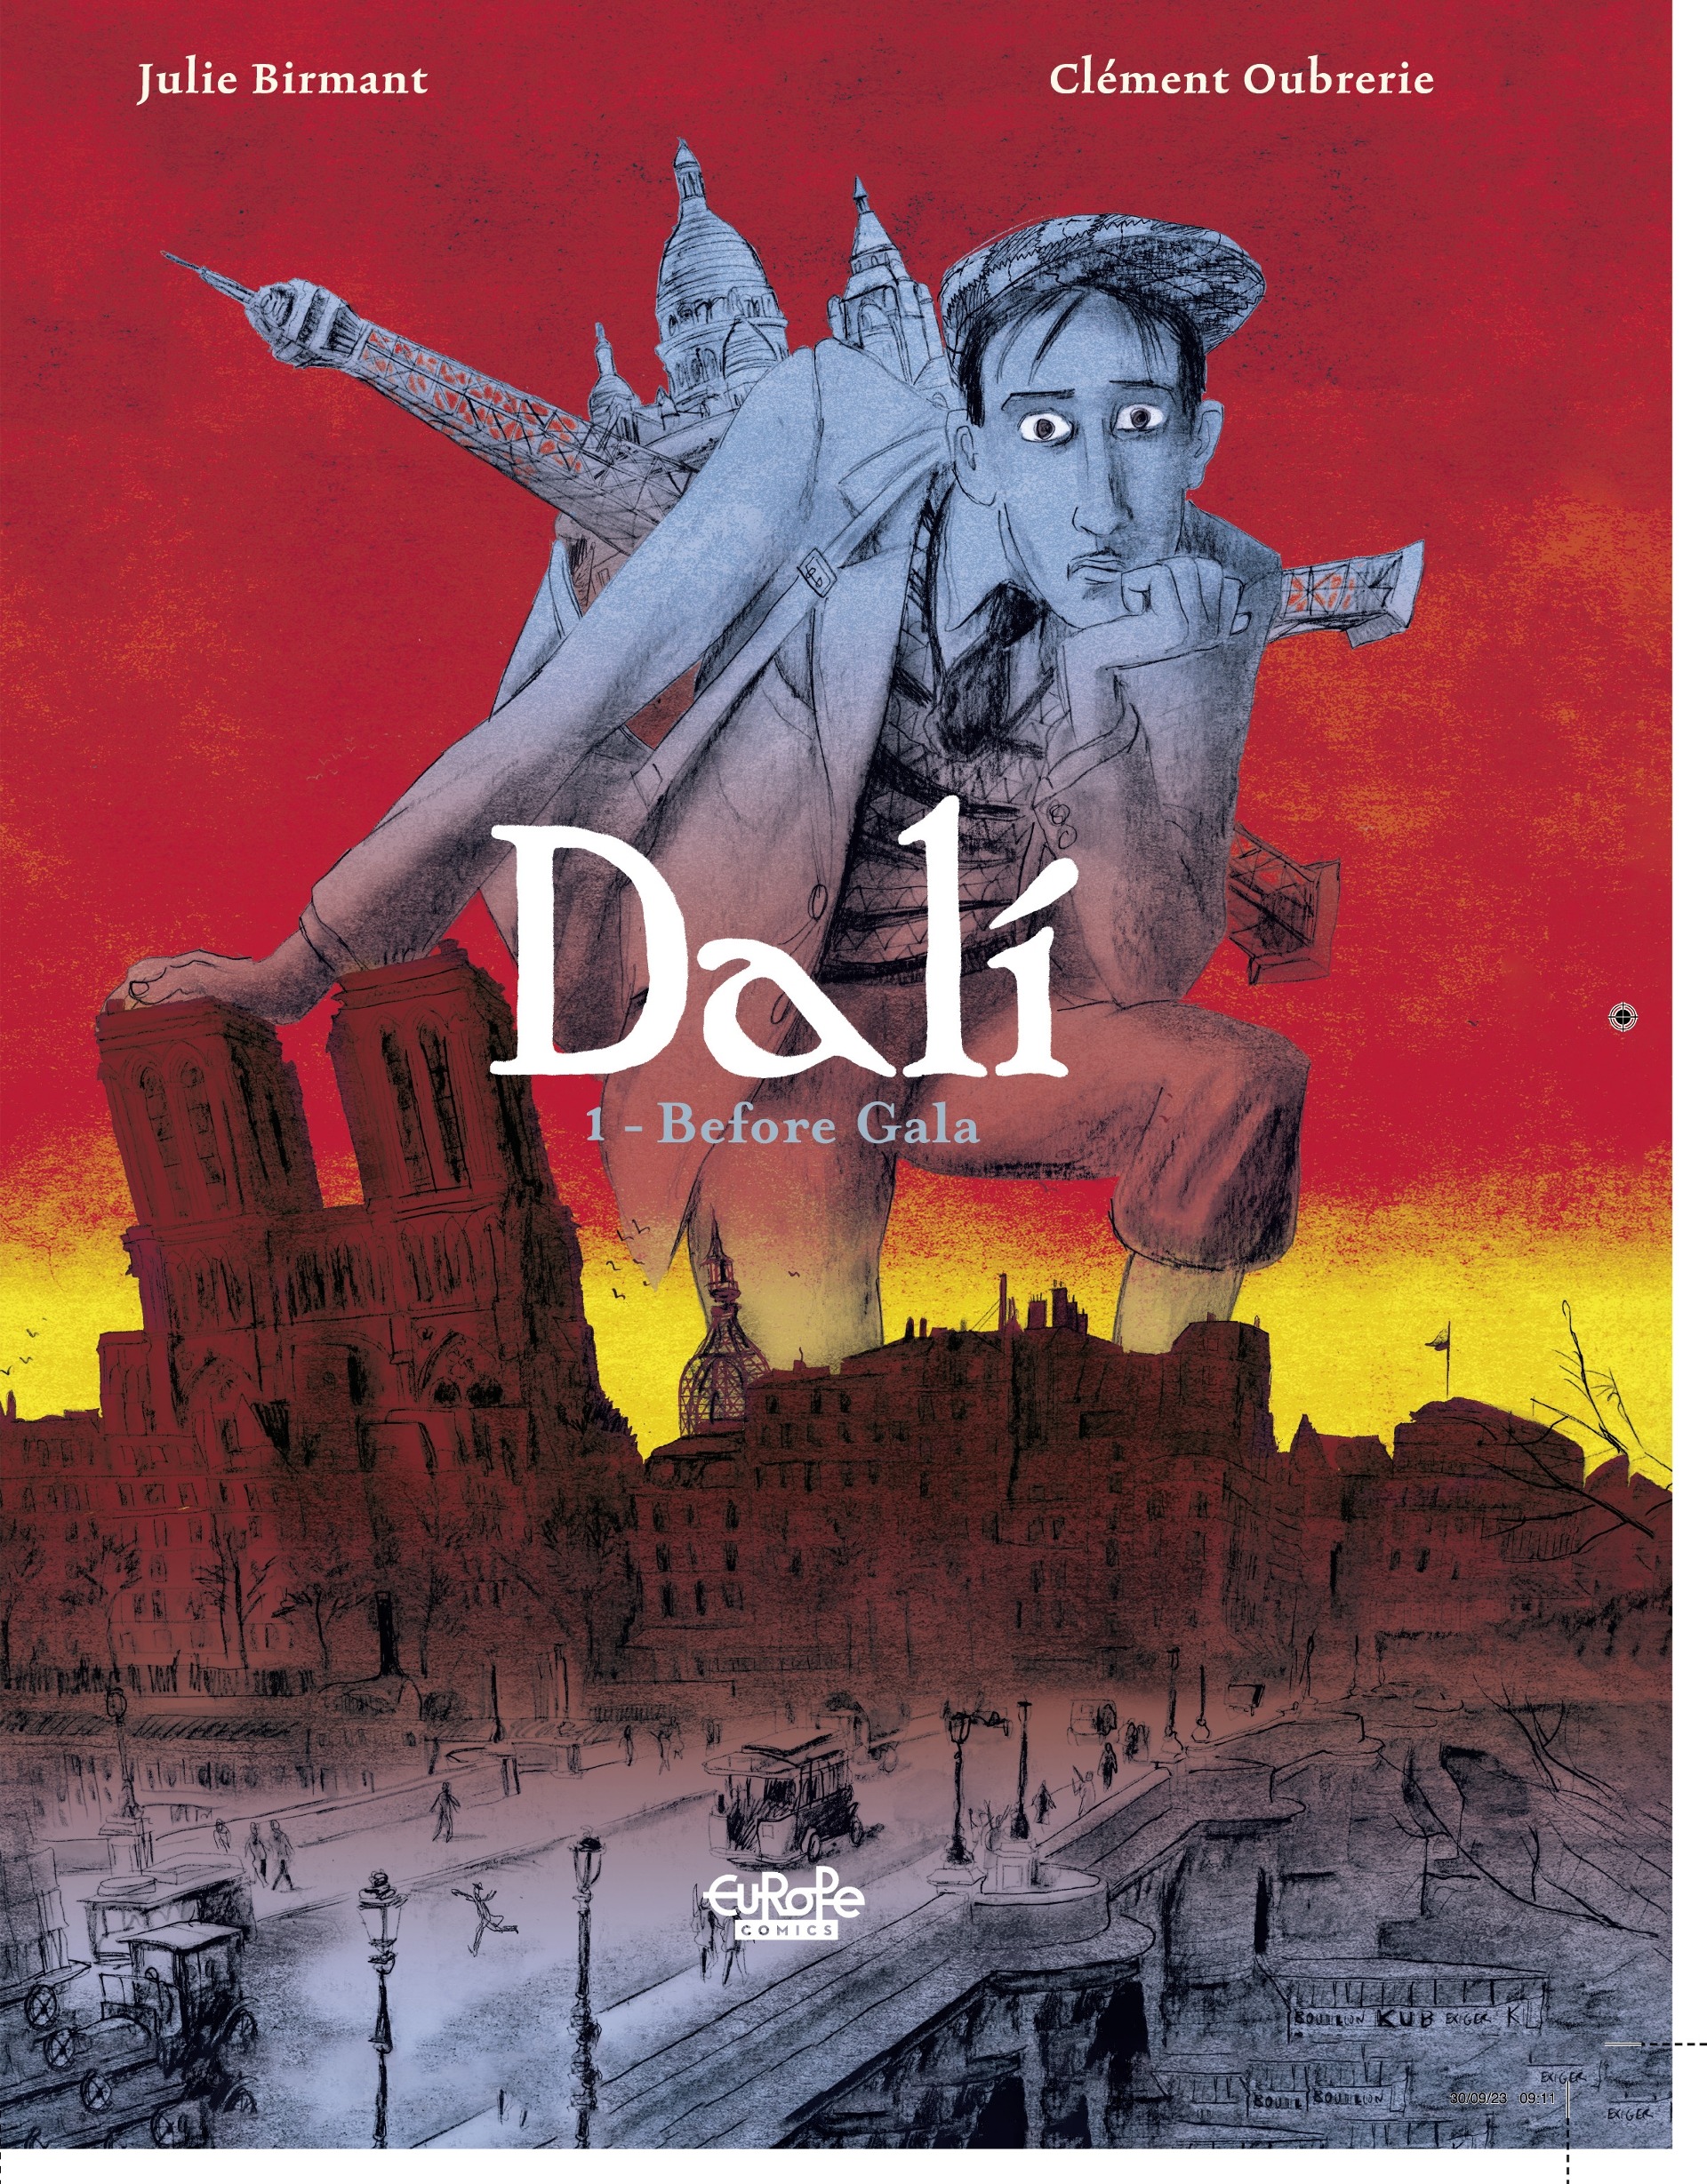 Read online Dalí: Before Gala comic -  Issue # TPB - 1